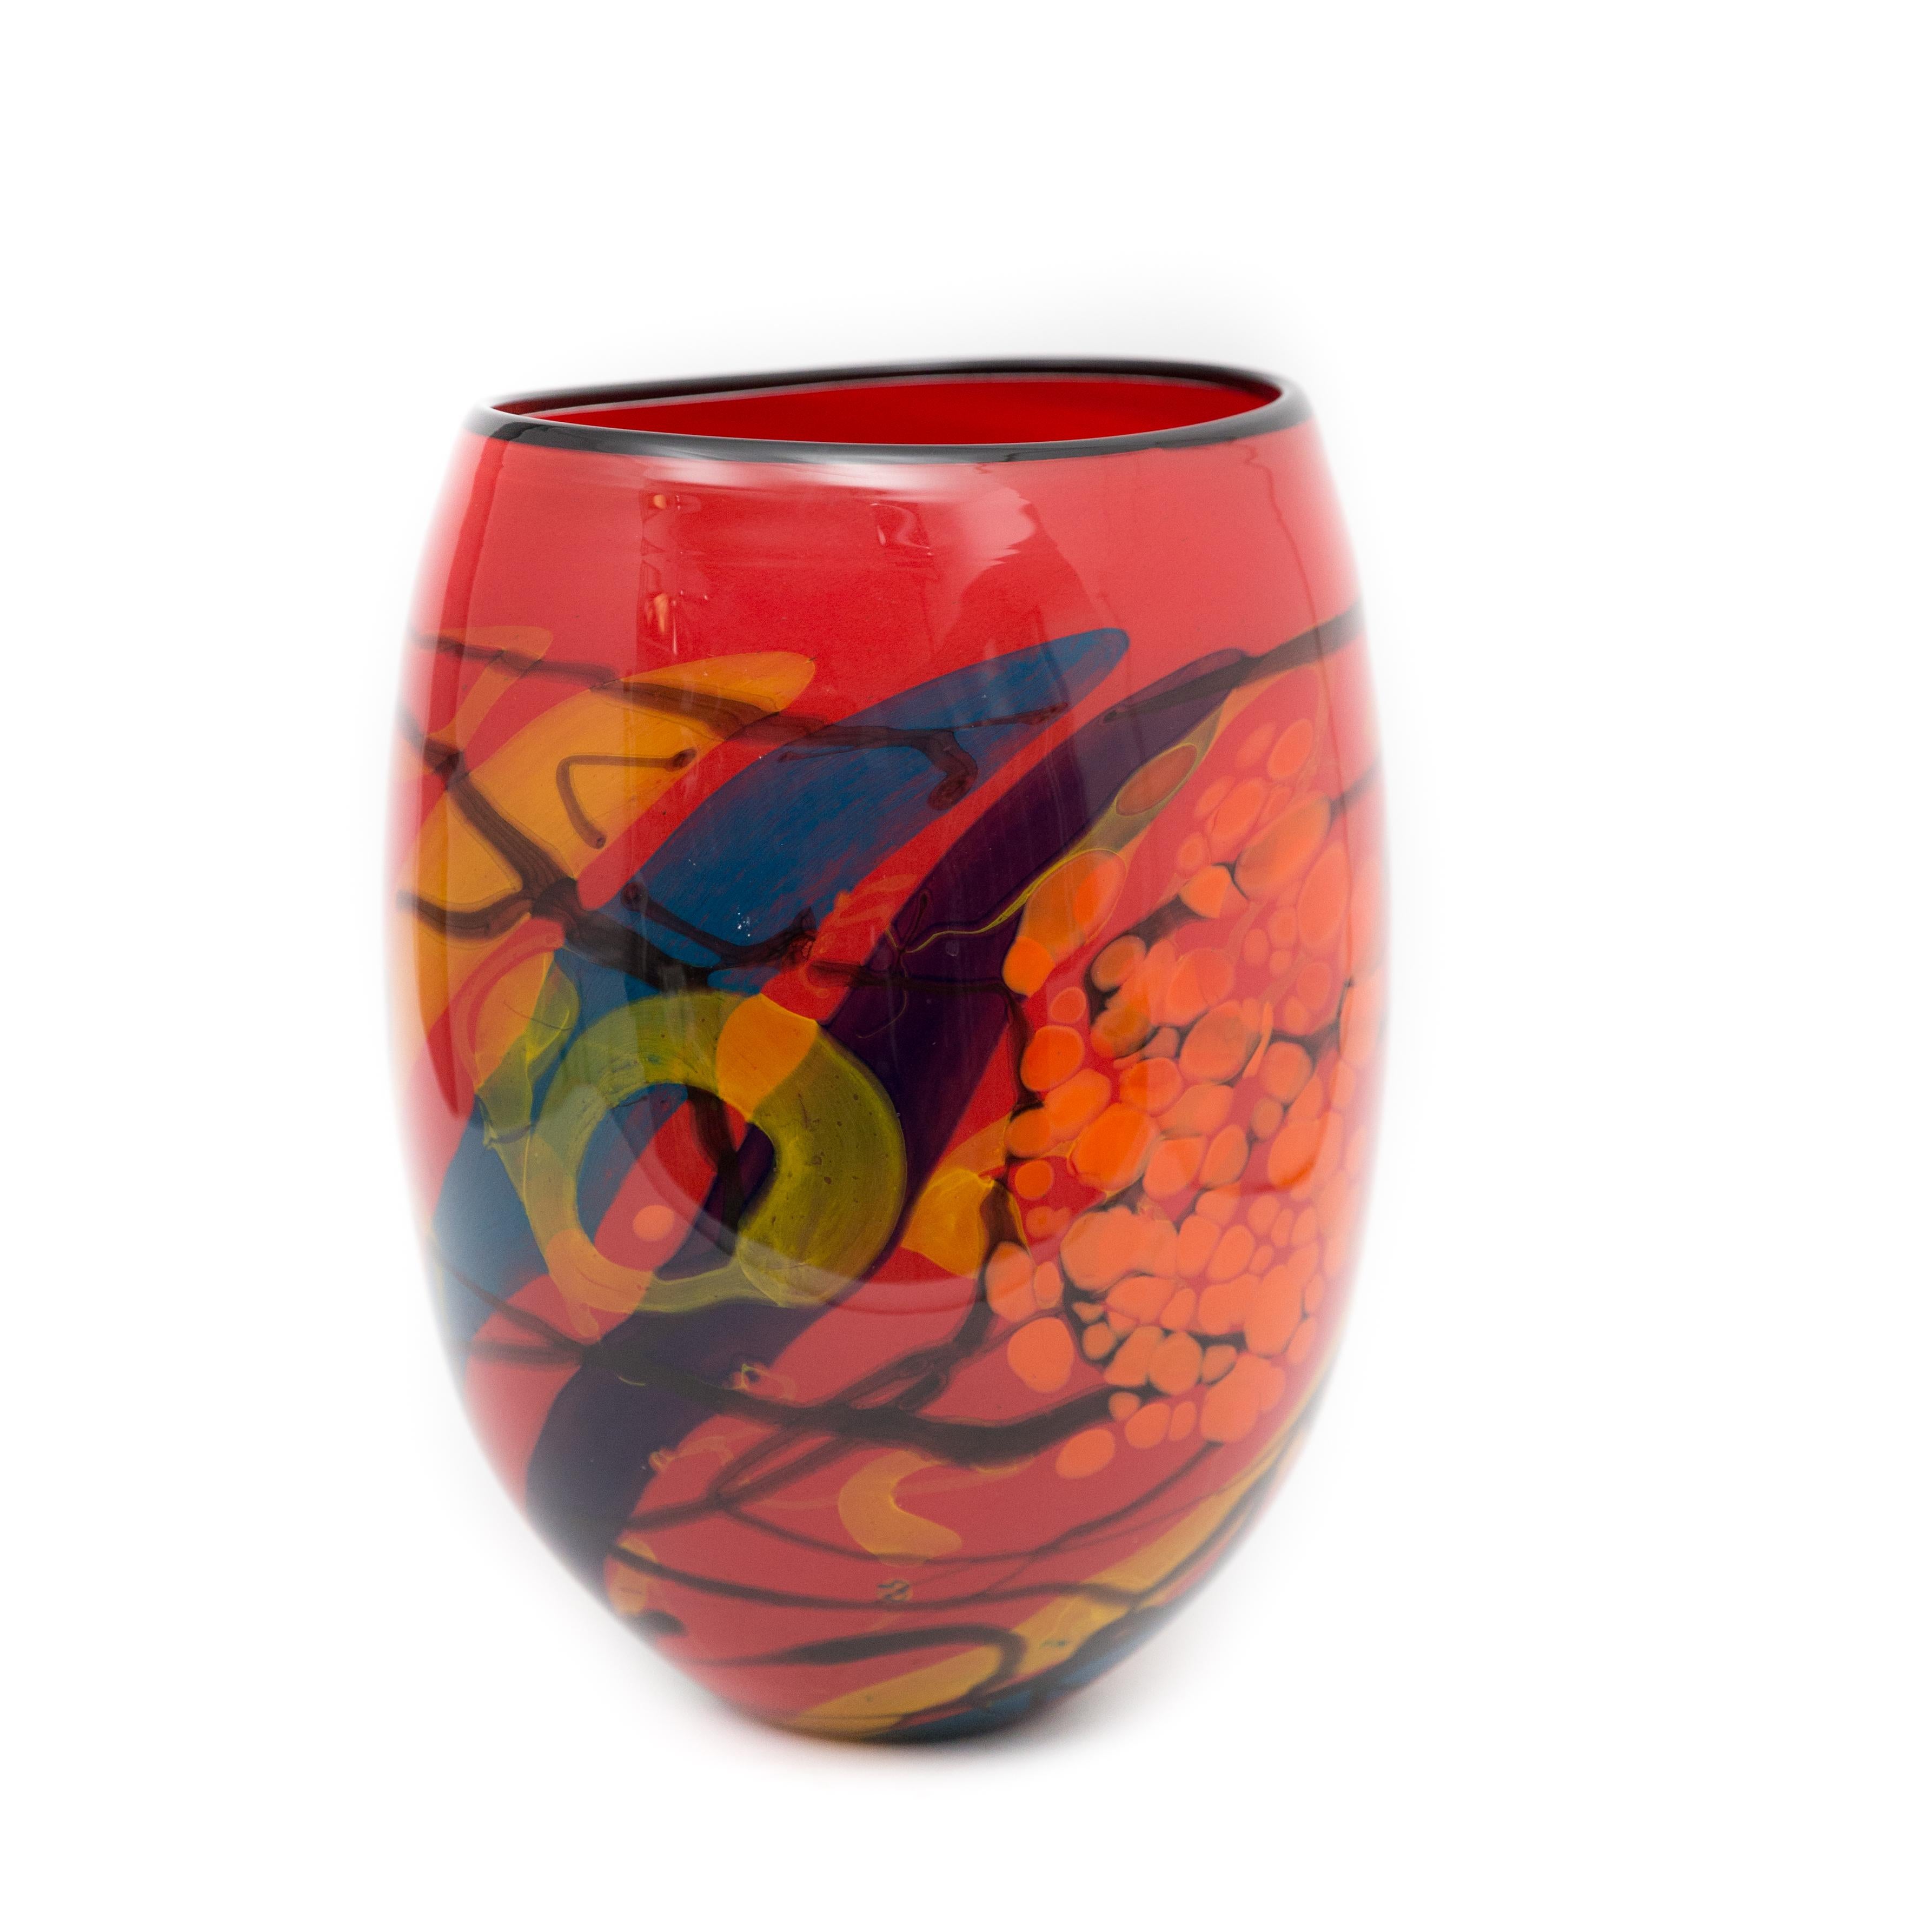 This vase is a vibrant red yellow and blue work that was created by Ioan Nemtoi. The artist signed the vase. The vase has a black rim, yellow and blue designs throughout, on a red ground. Born in Romania in 1964 he attended the Academy at Bucharest,